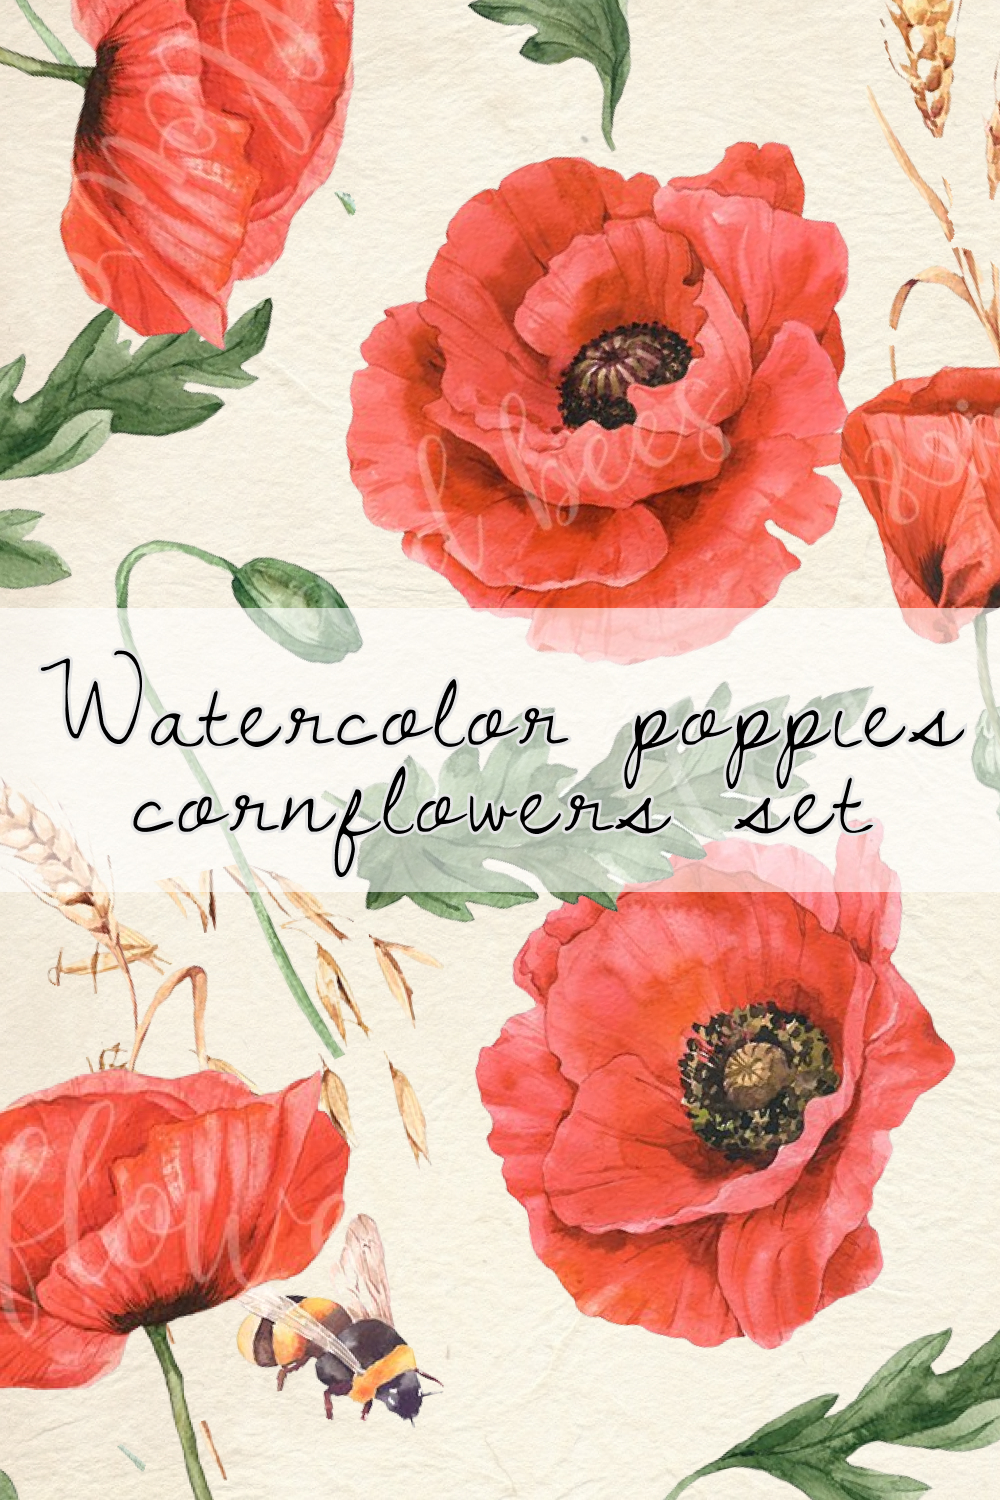 Watercolor poppies, cornflowers set and Little Bee.